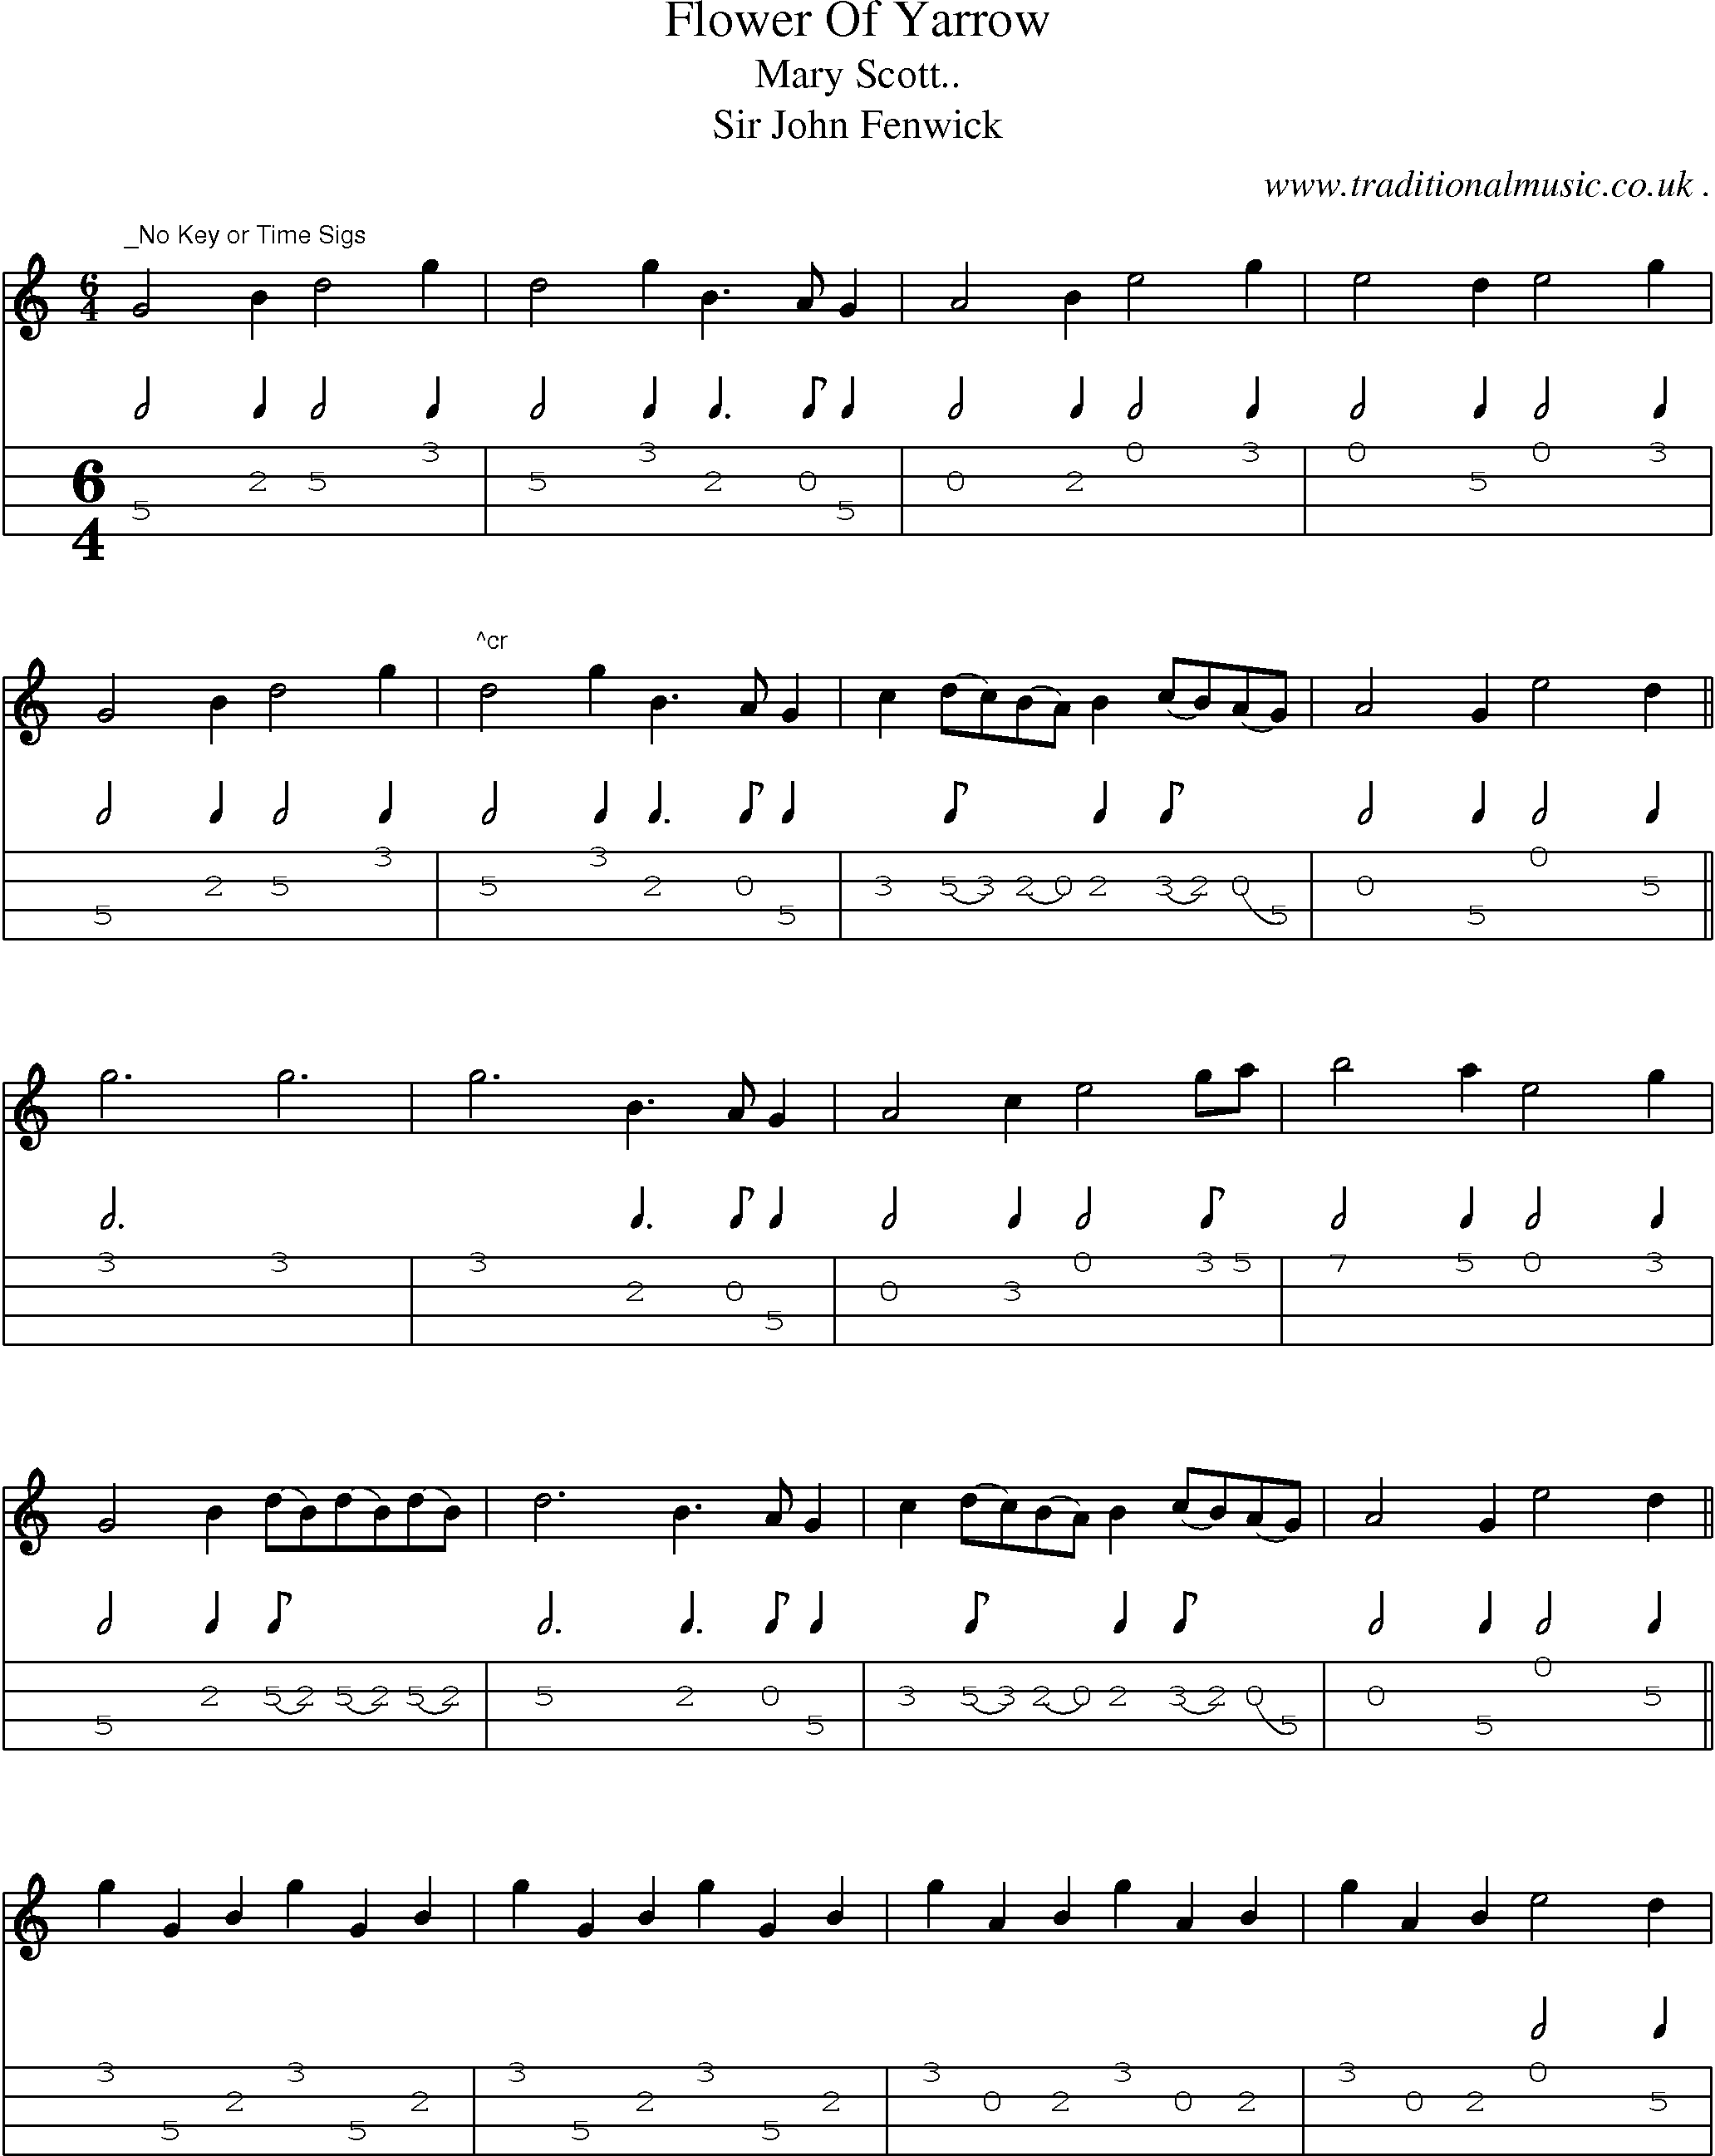 Sheet-Music and Mandolin Tabs for Flower Of Yarrow